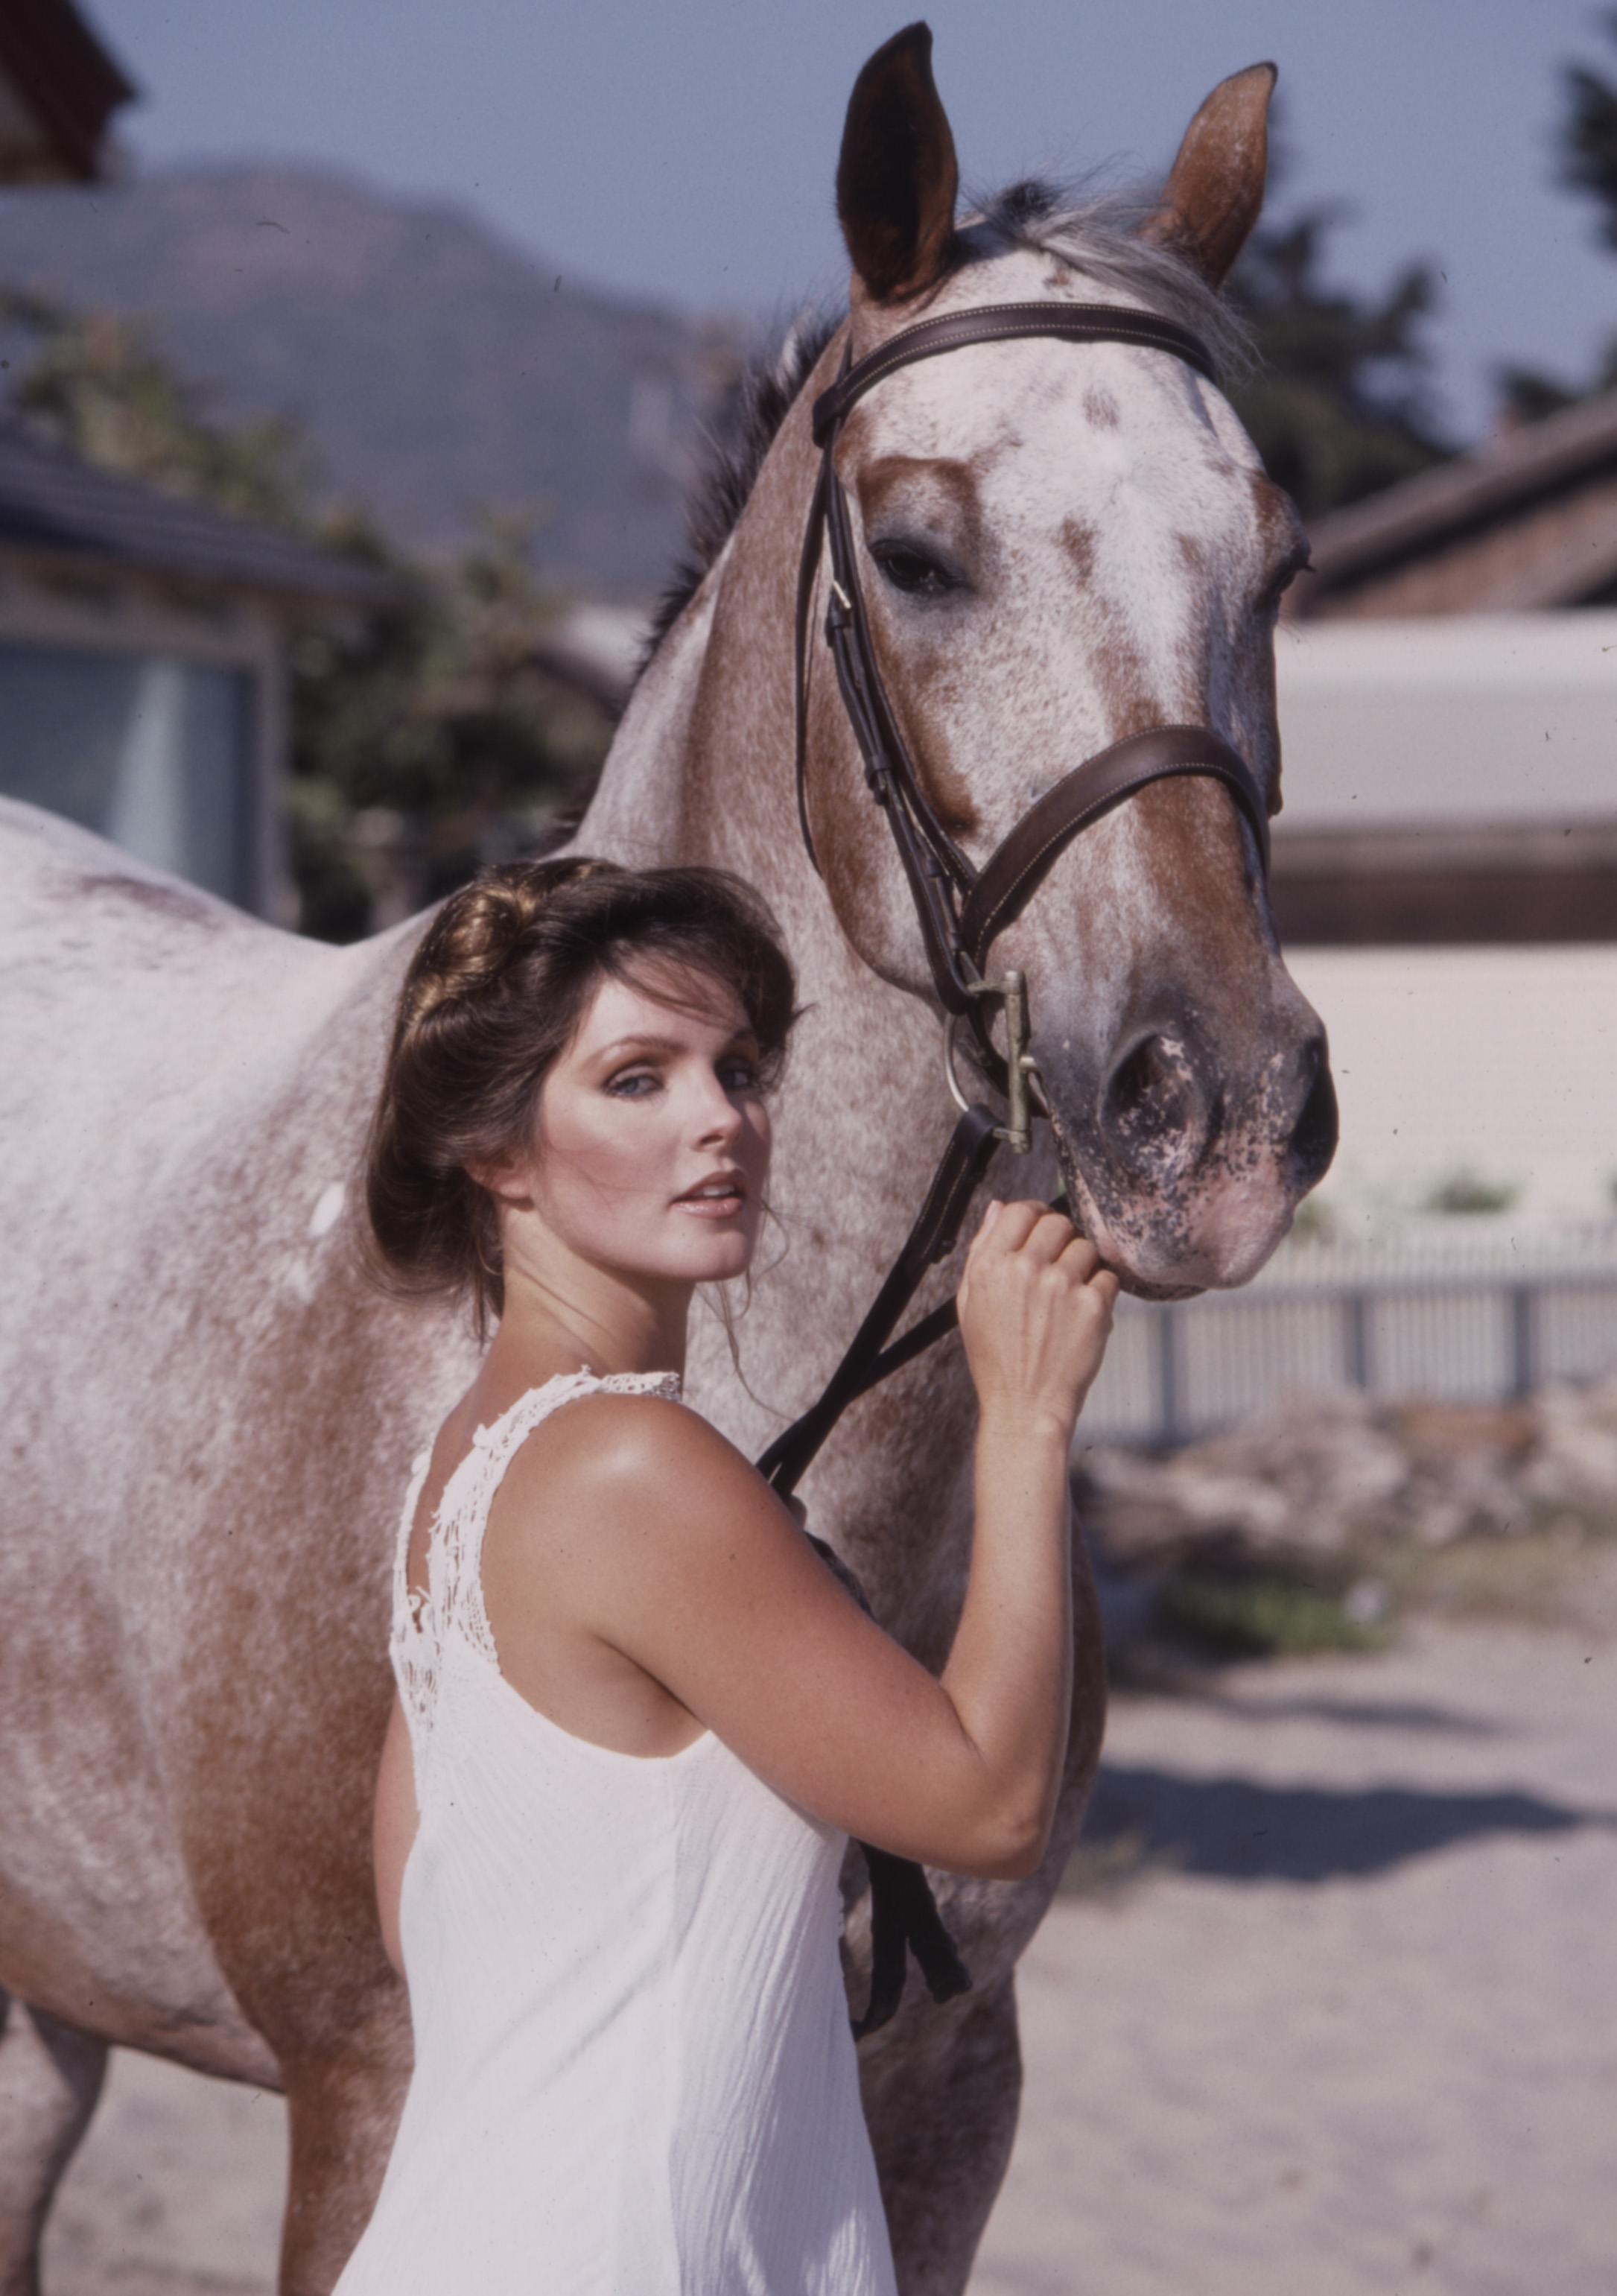 Priscilla Presley's promotional photo for "Those Amazing Animals" in Los Angeles, California, circa 1980 | Source: Getty Images